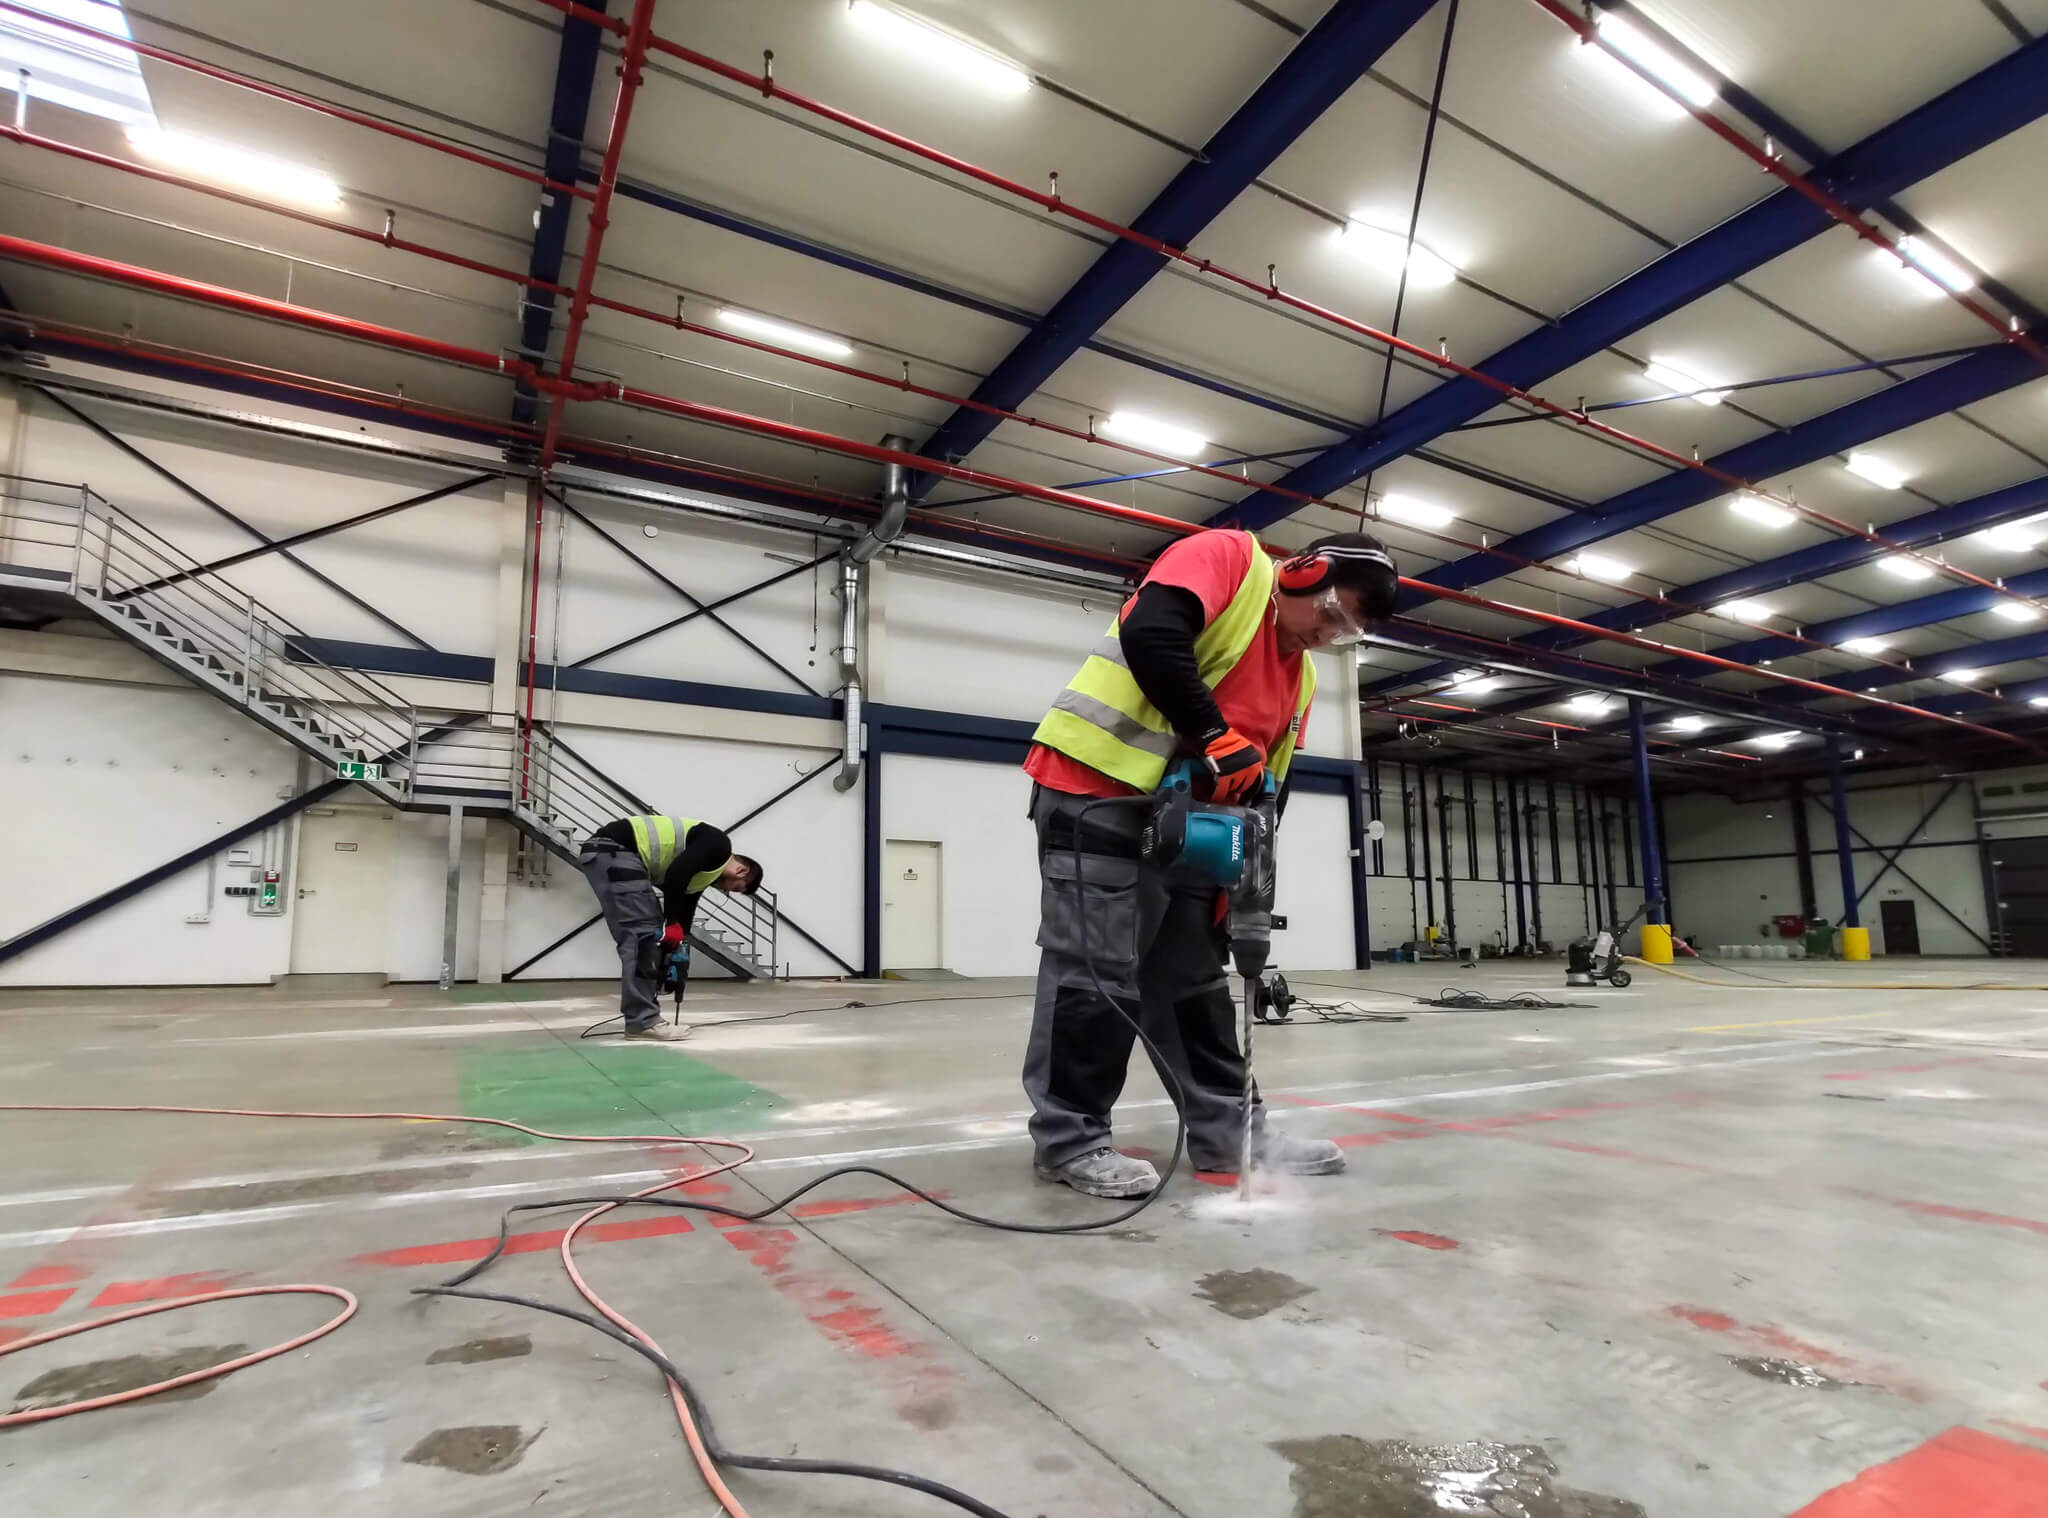 Concrete polishing creates smooth and durable surfaces, which notably protect forklift tires.